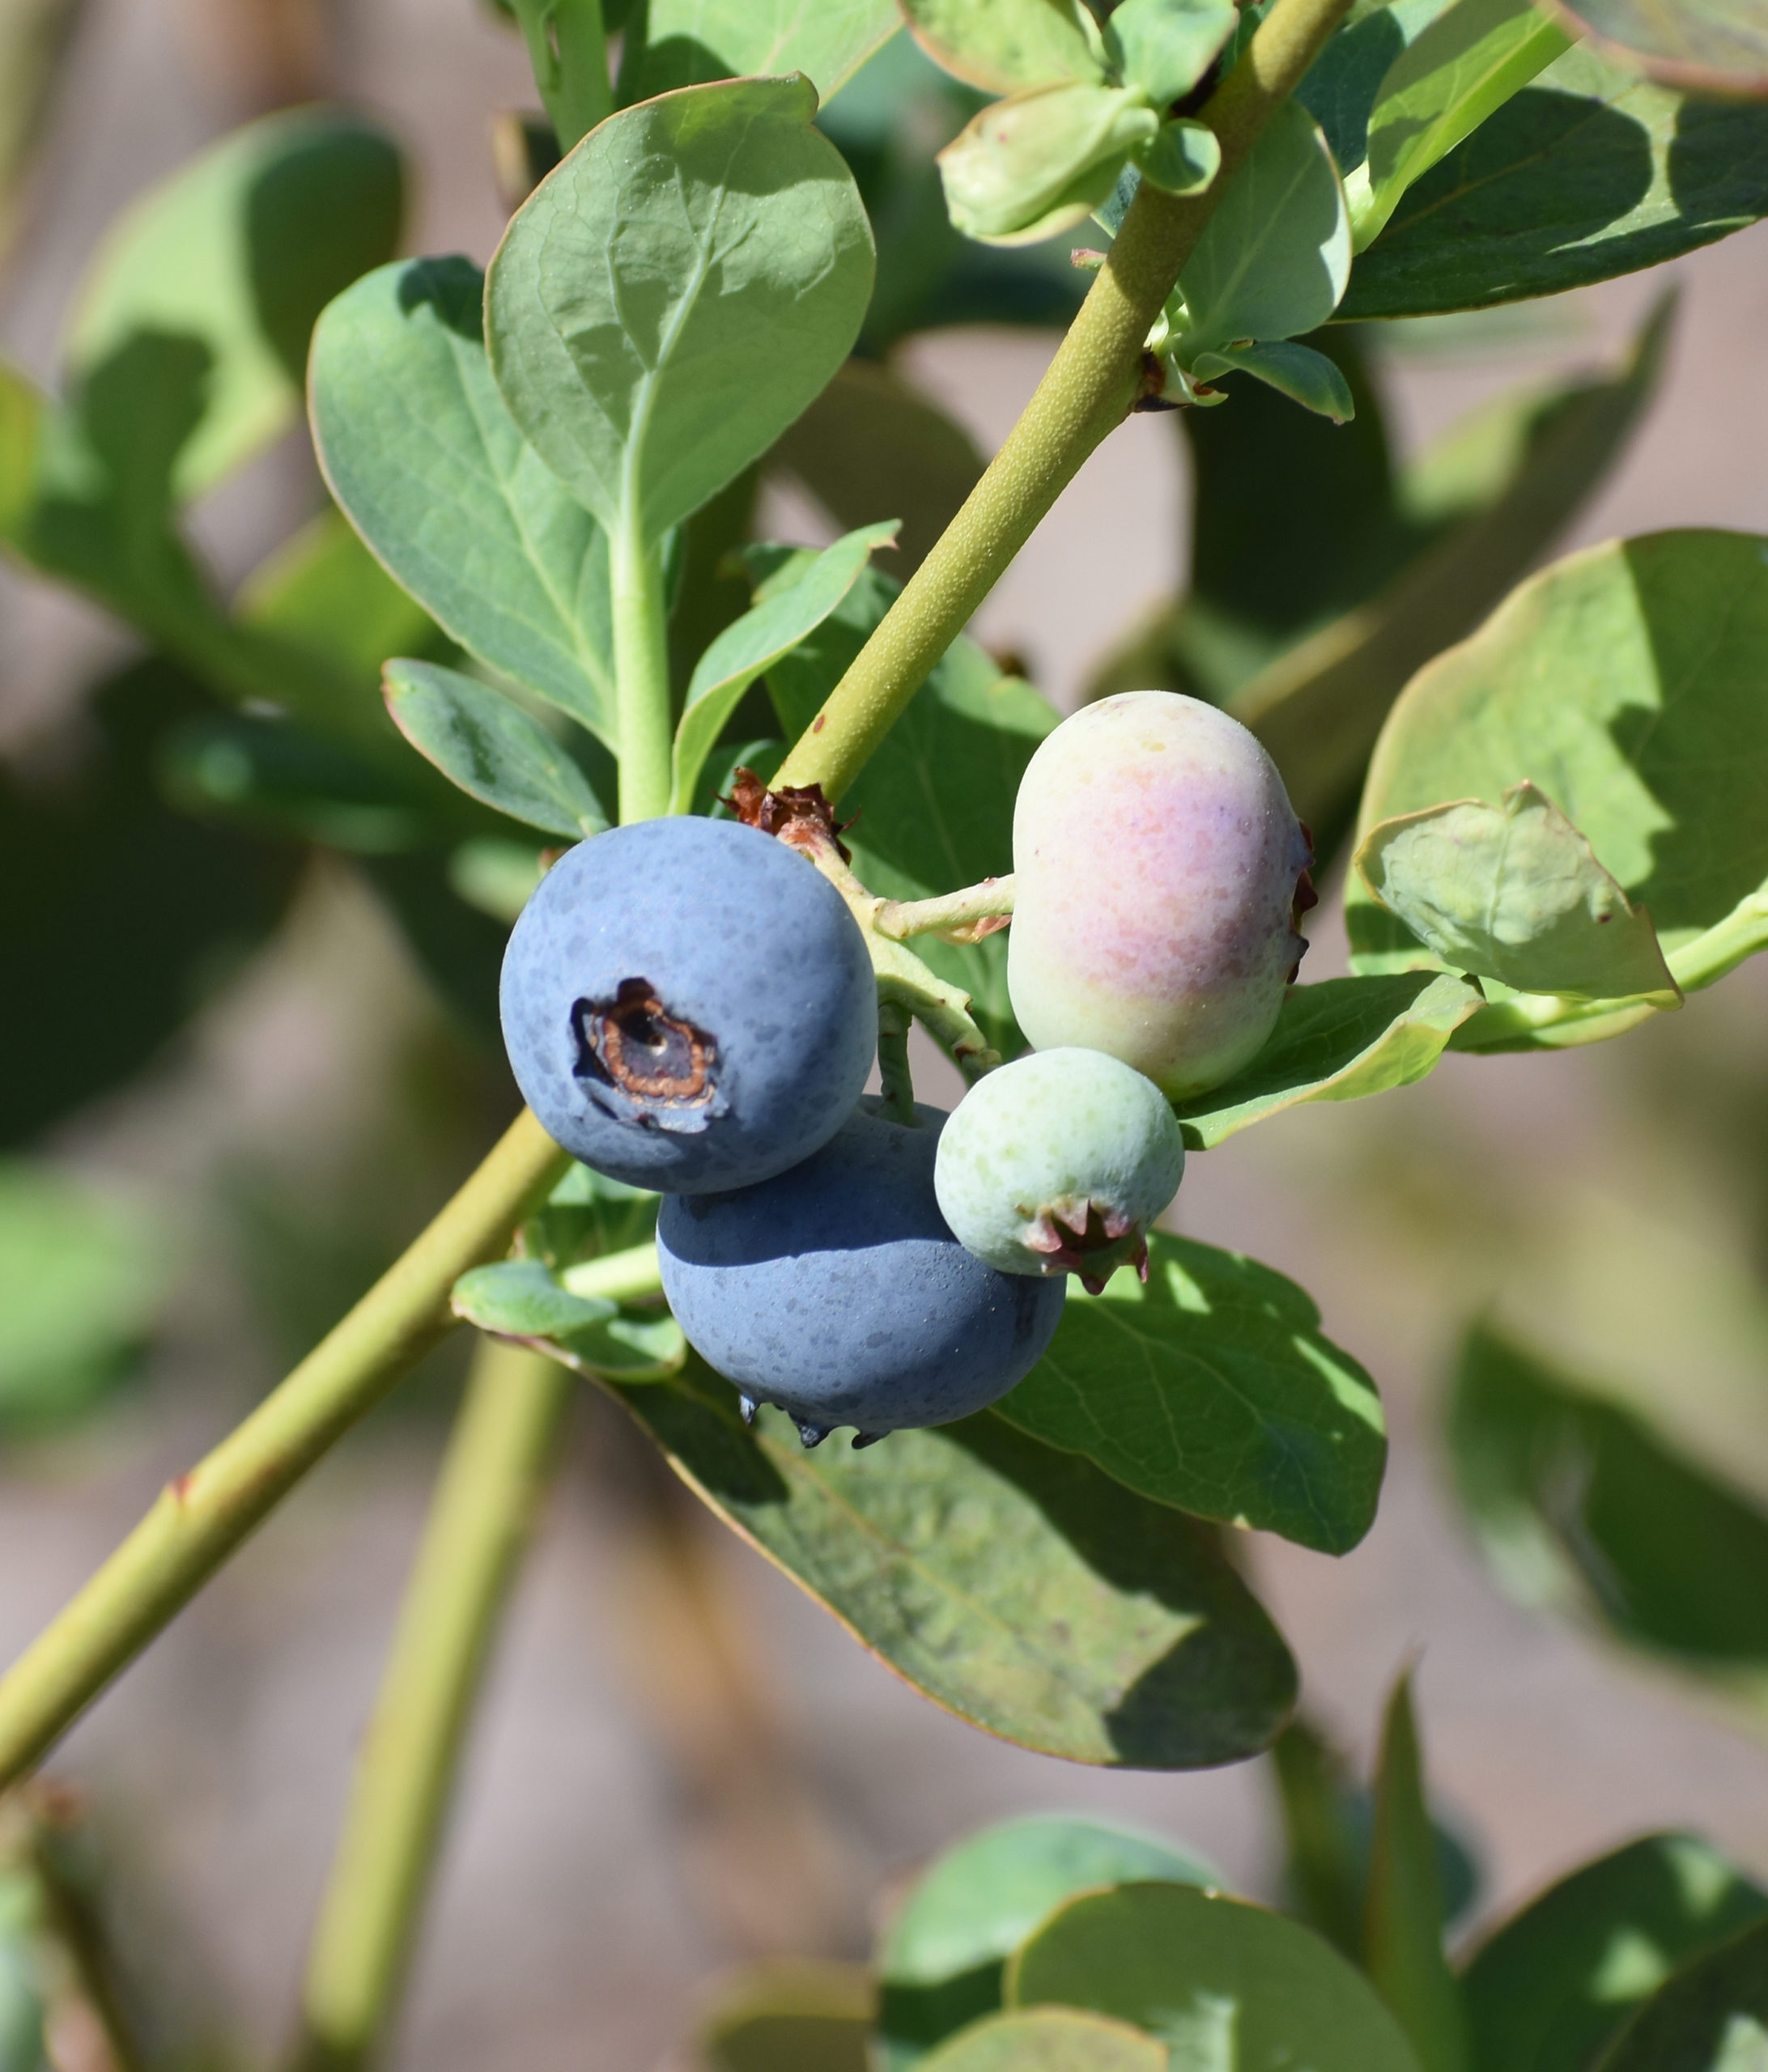 Featured image for “Georgia Blueberry, Vegetable Growers Vote to Extend Assessments”